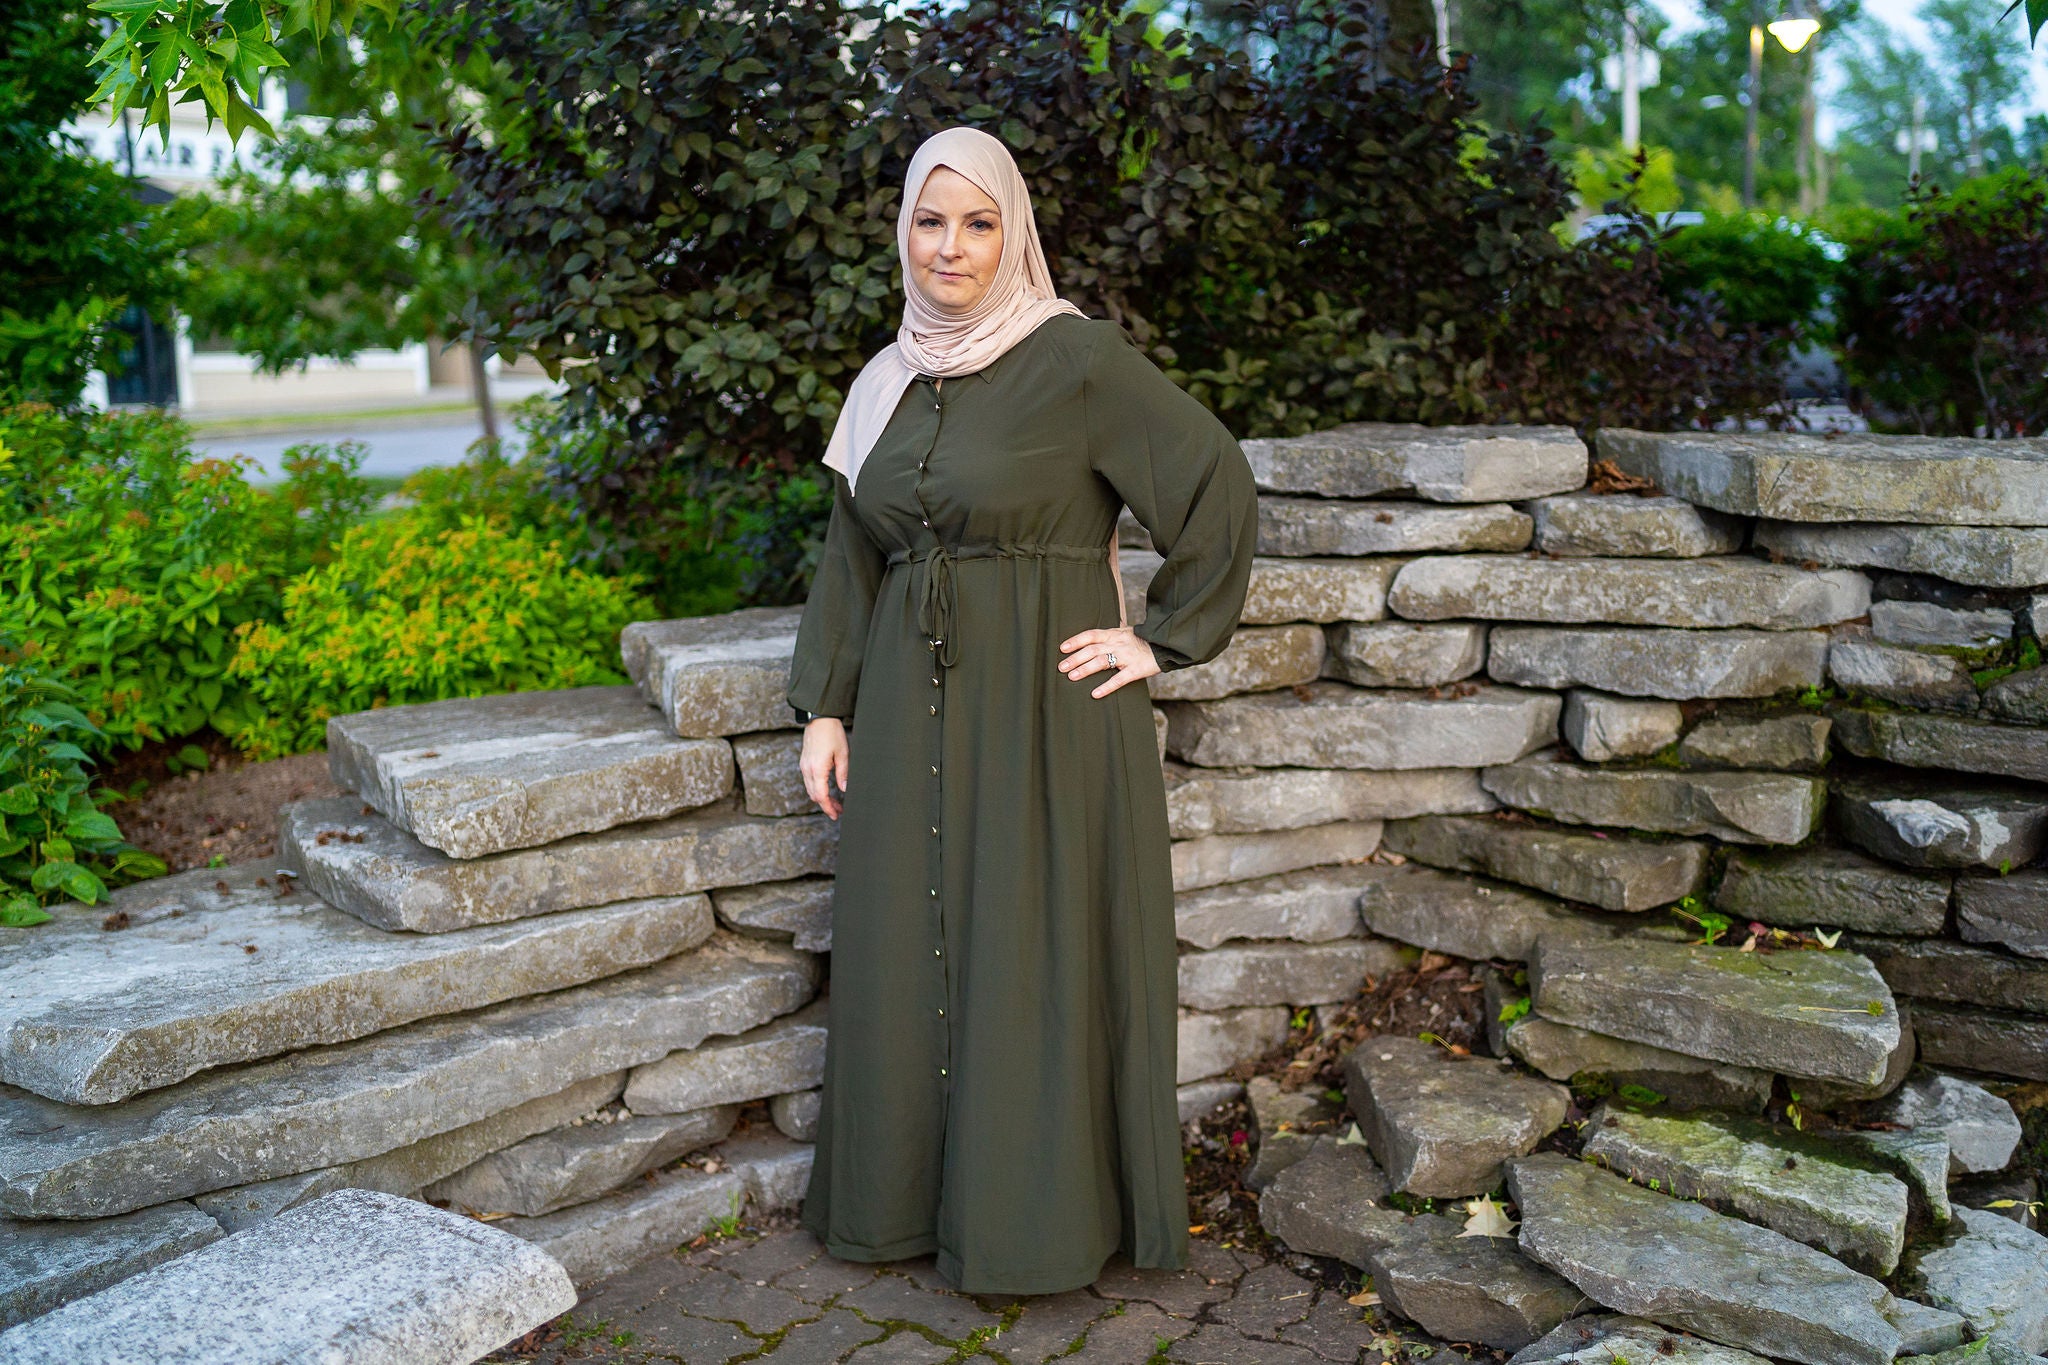 women wearing an abaya/maxi dress with a pointed collar with buttons down the front with a drawstring